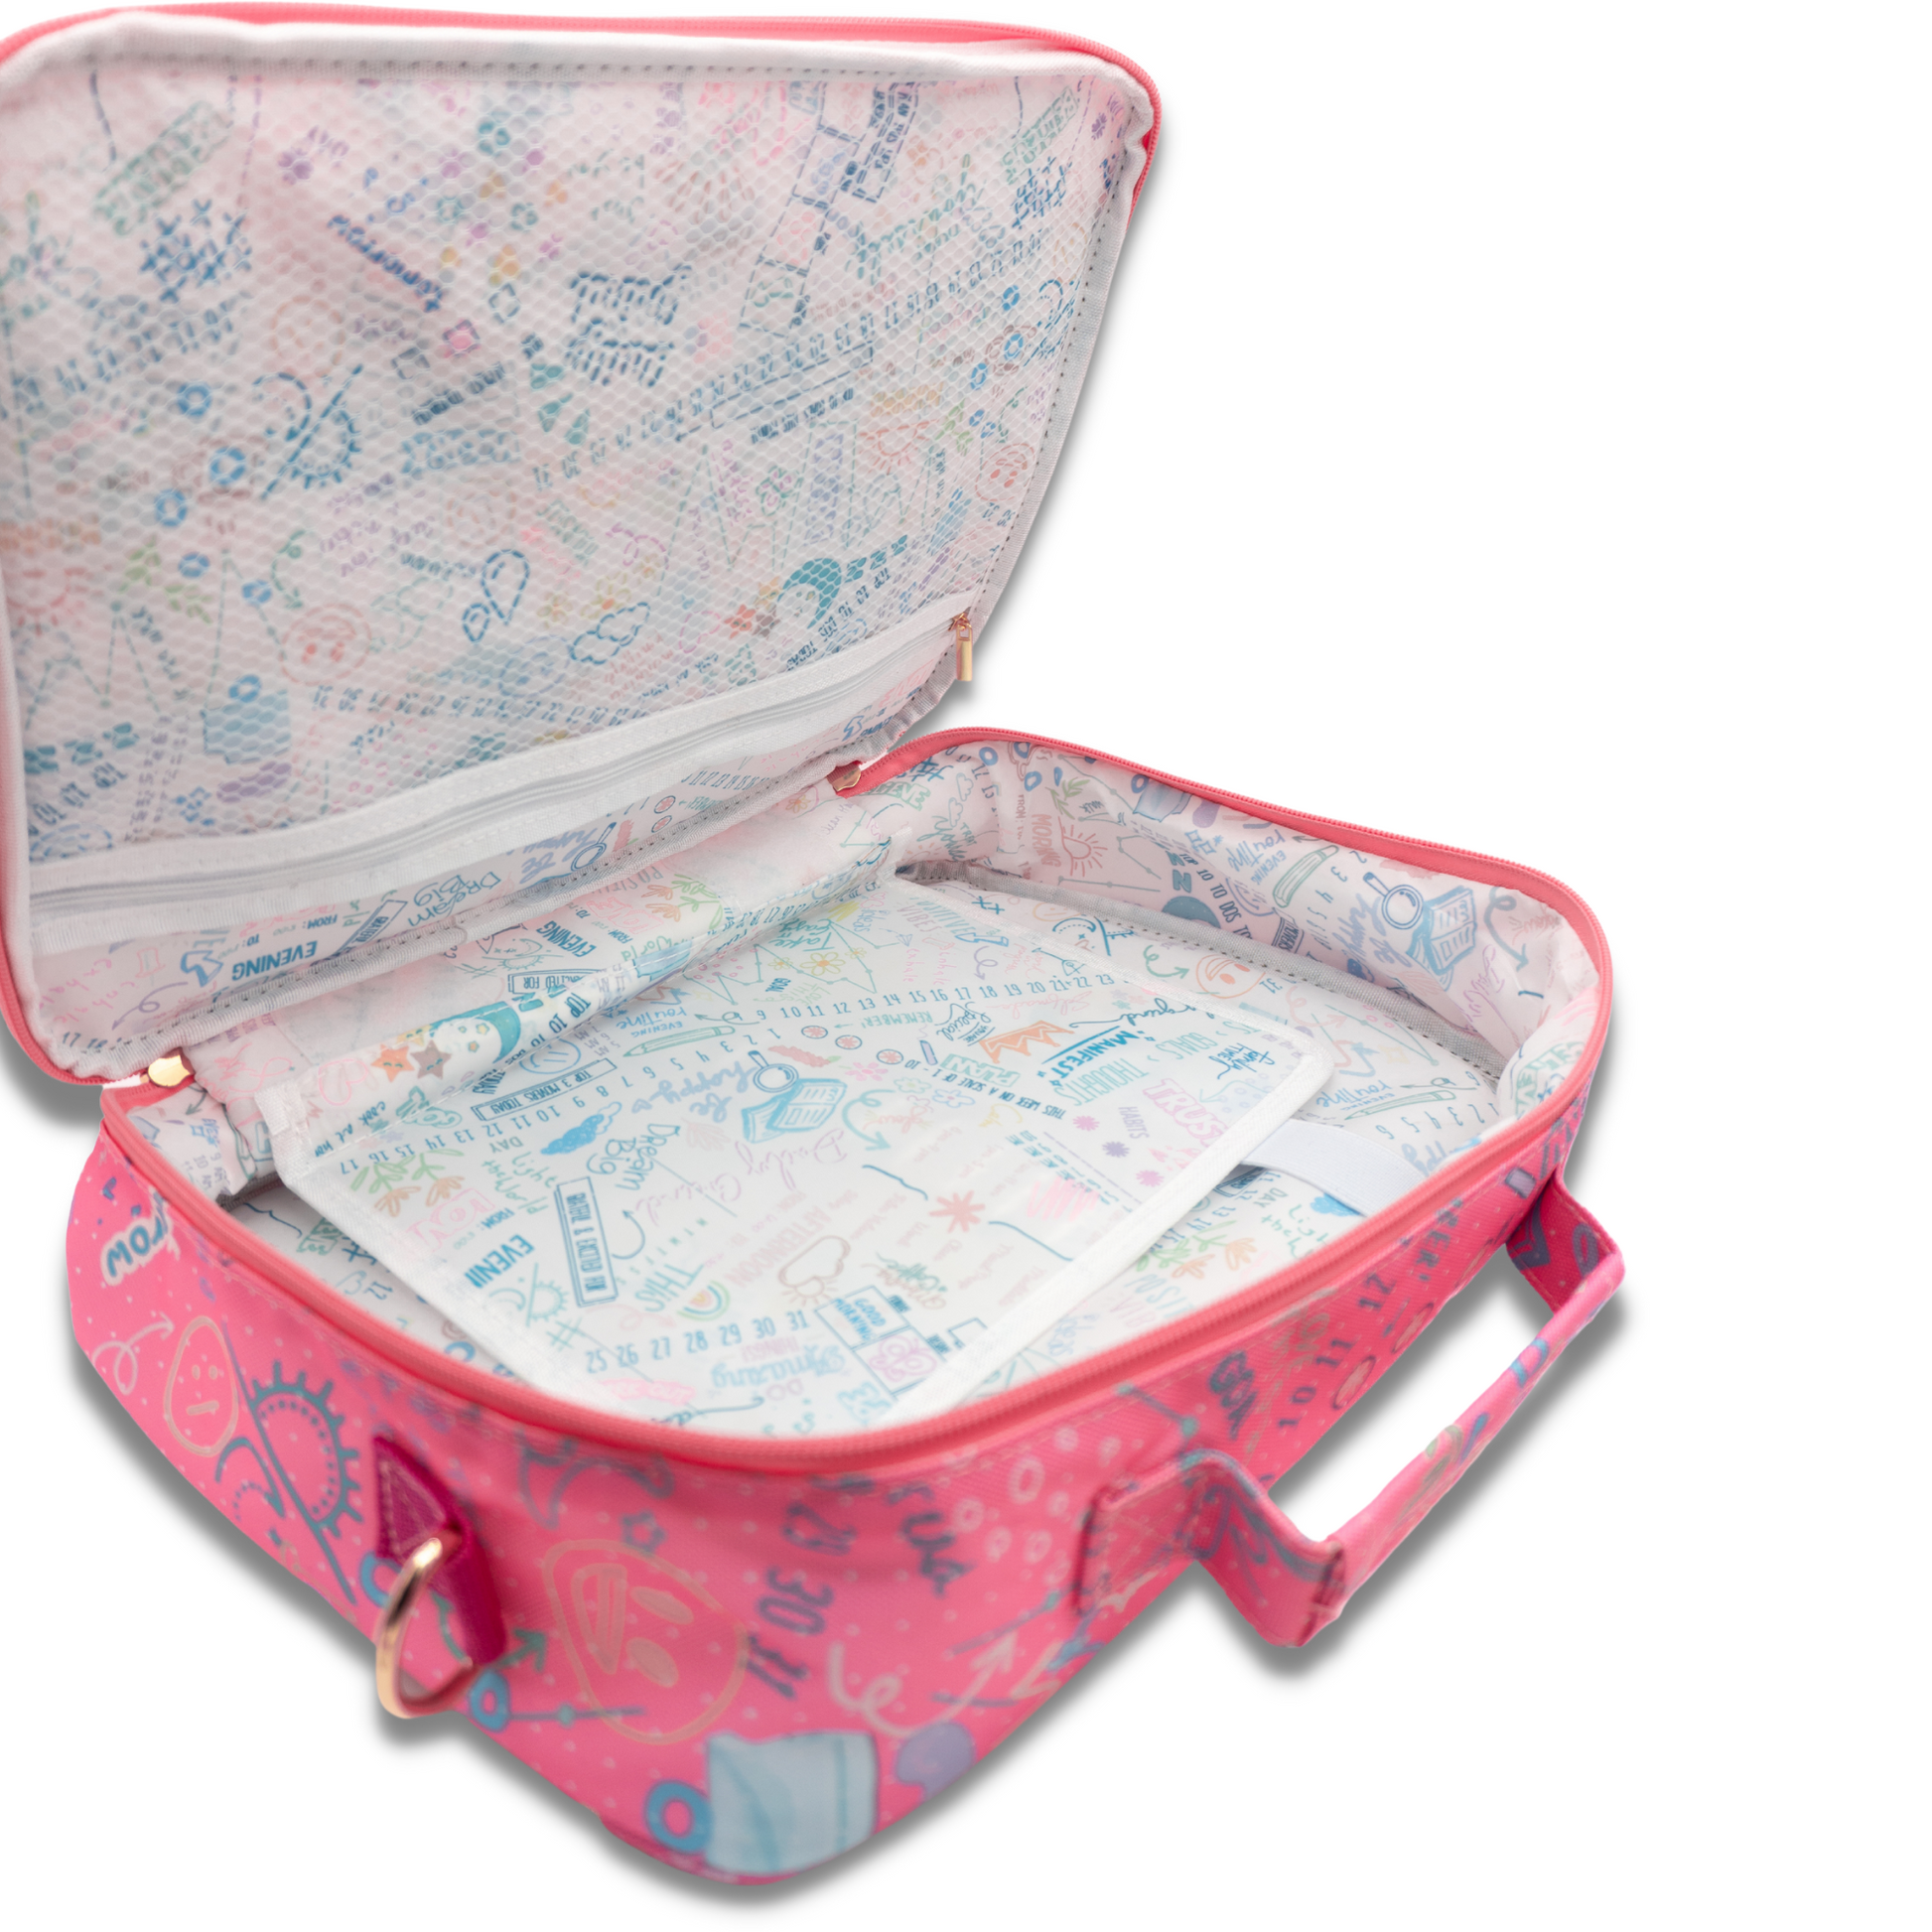 Inside view of pink planner travel case